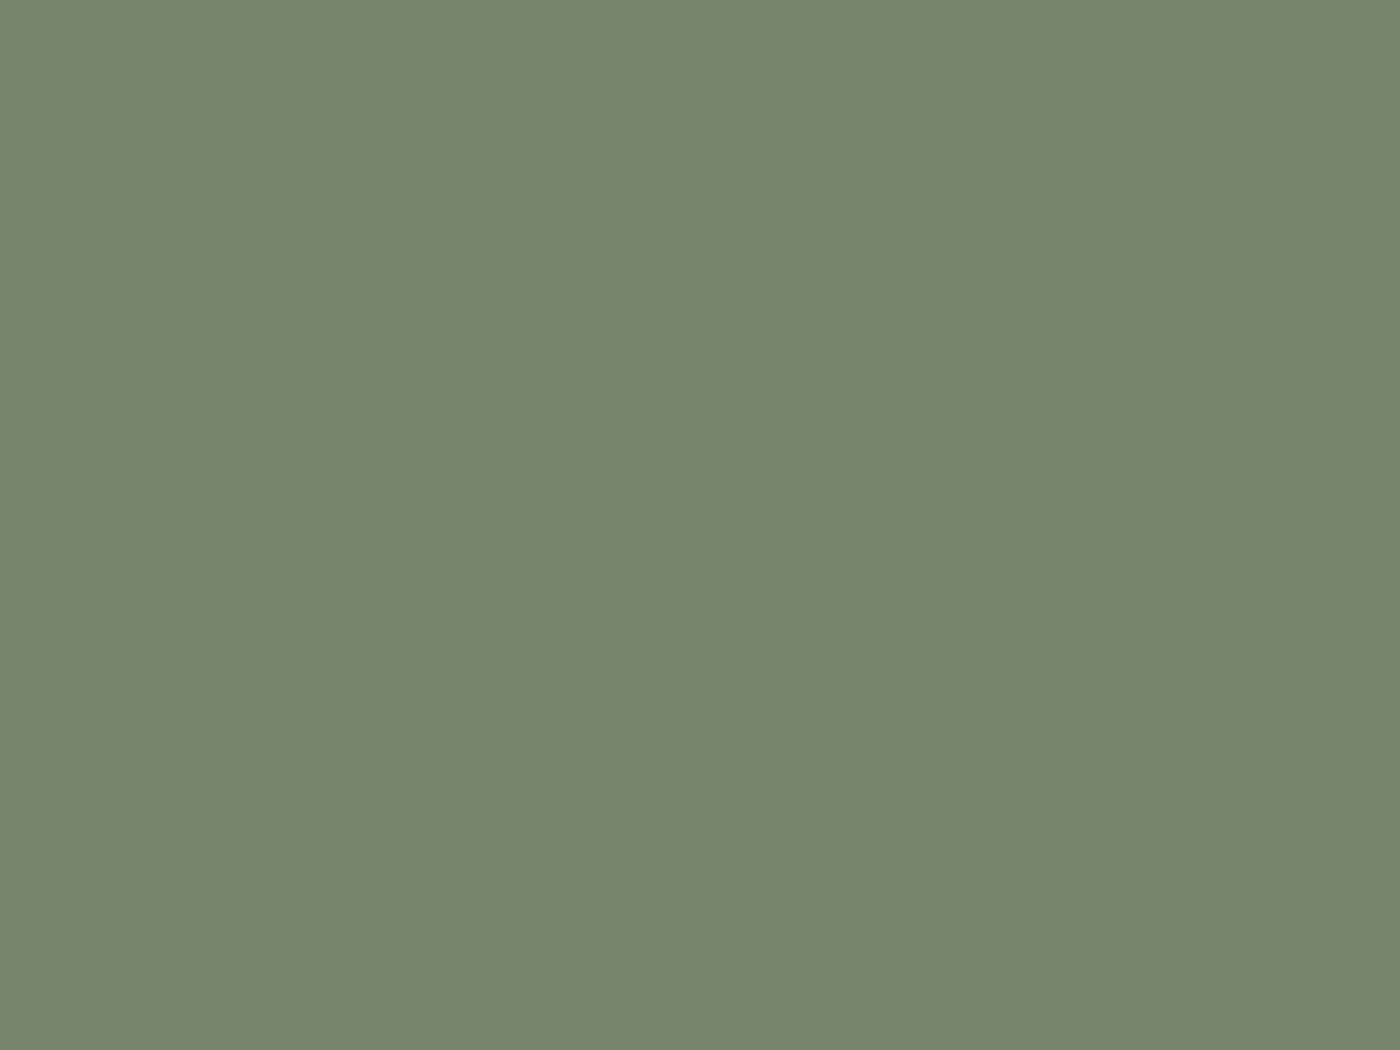 1400x1050 Camouflage Green Solid Color Background